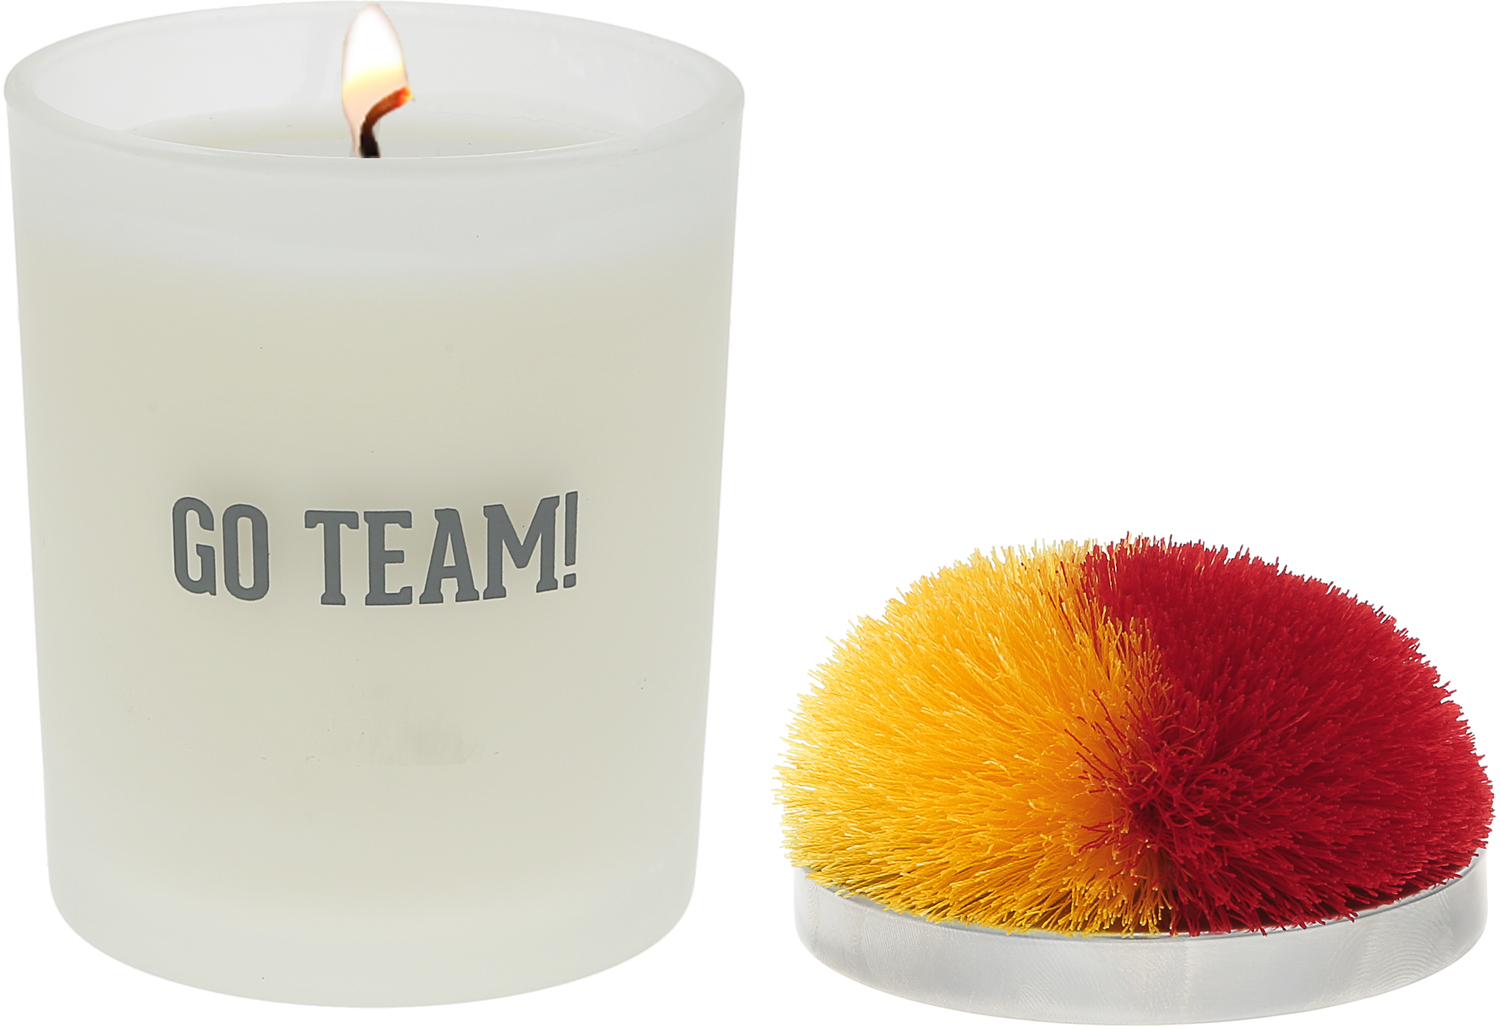 Go Team! - Red & Yellow by Repre-Scent - Go Team! - Red & Yellow - 5.5 oz - 100% Soy Wax Candle with Pom Pom Lid
Scent: Tranquility